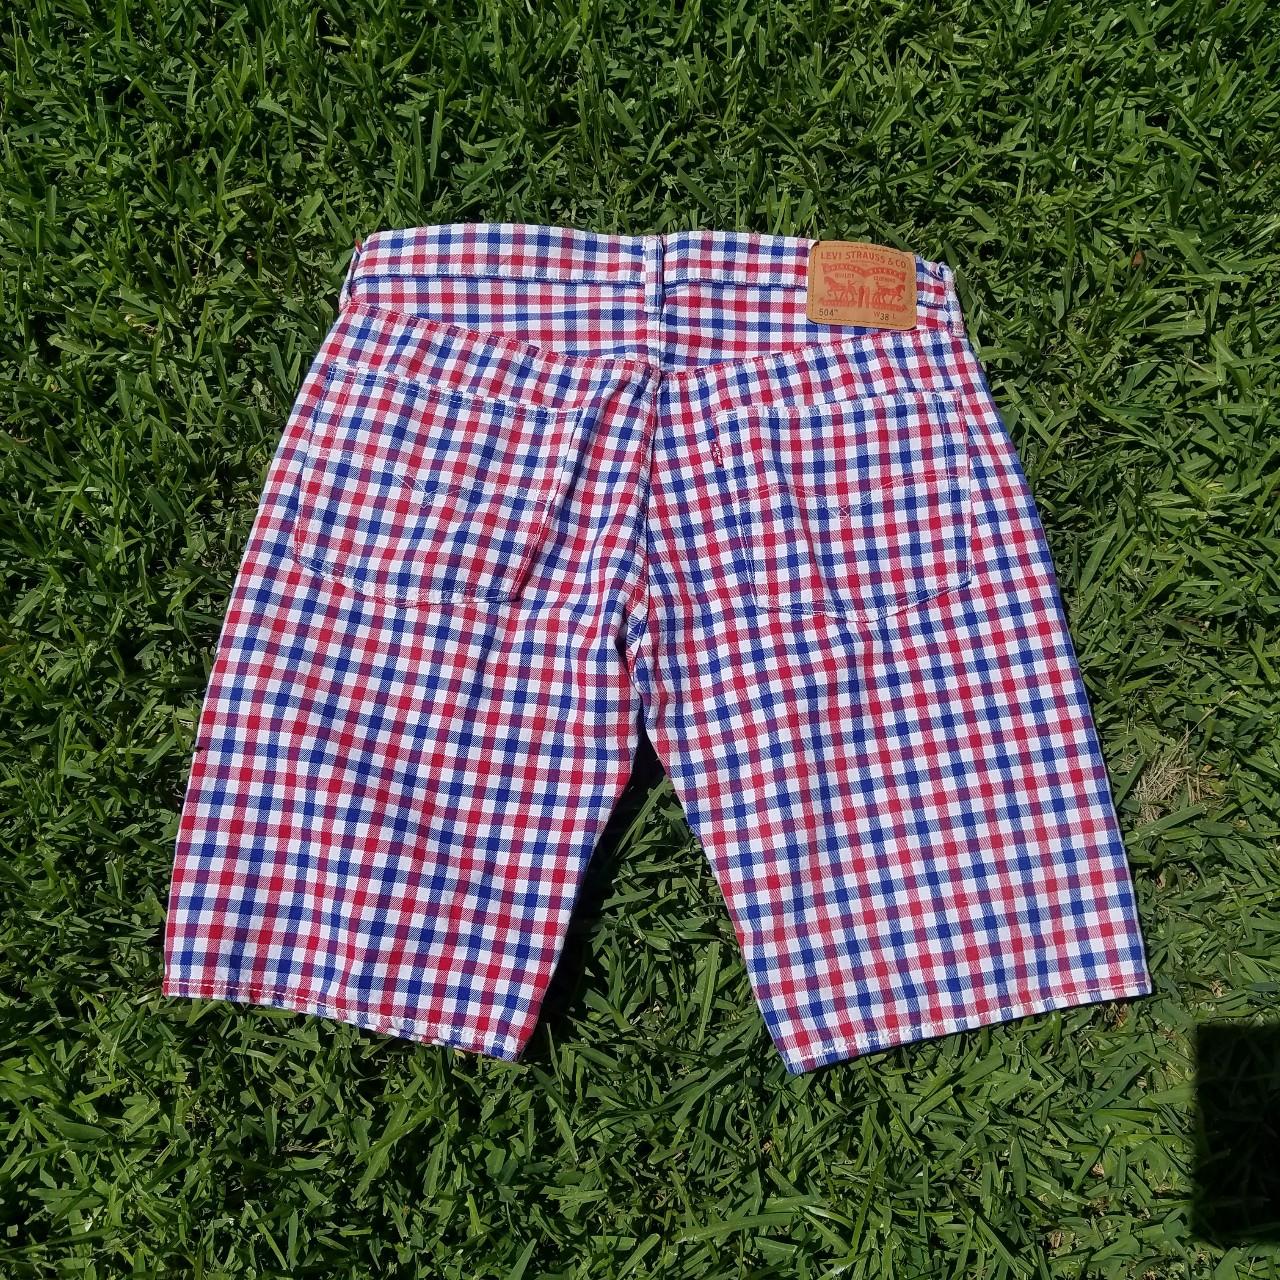 Levis 504 Gingham Shorts red blue and white striped... - Depop